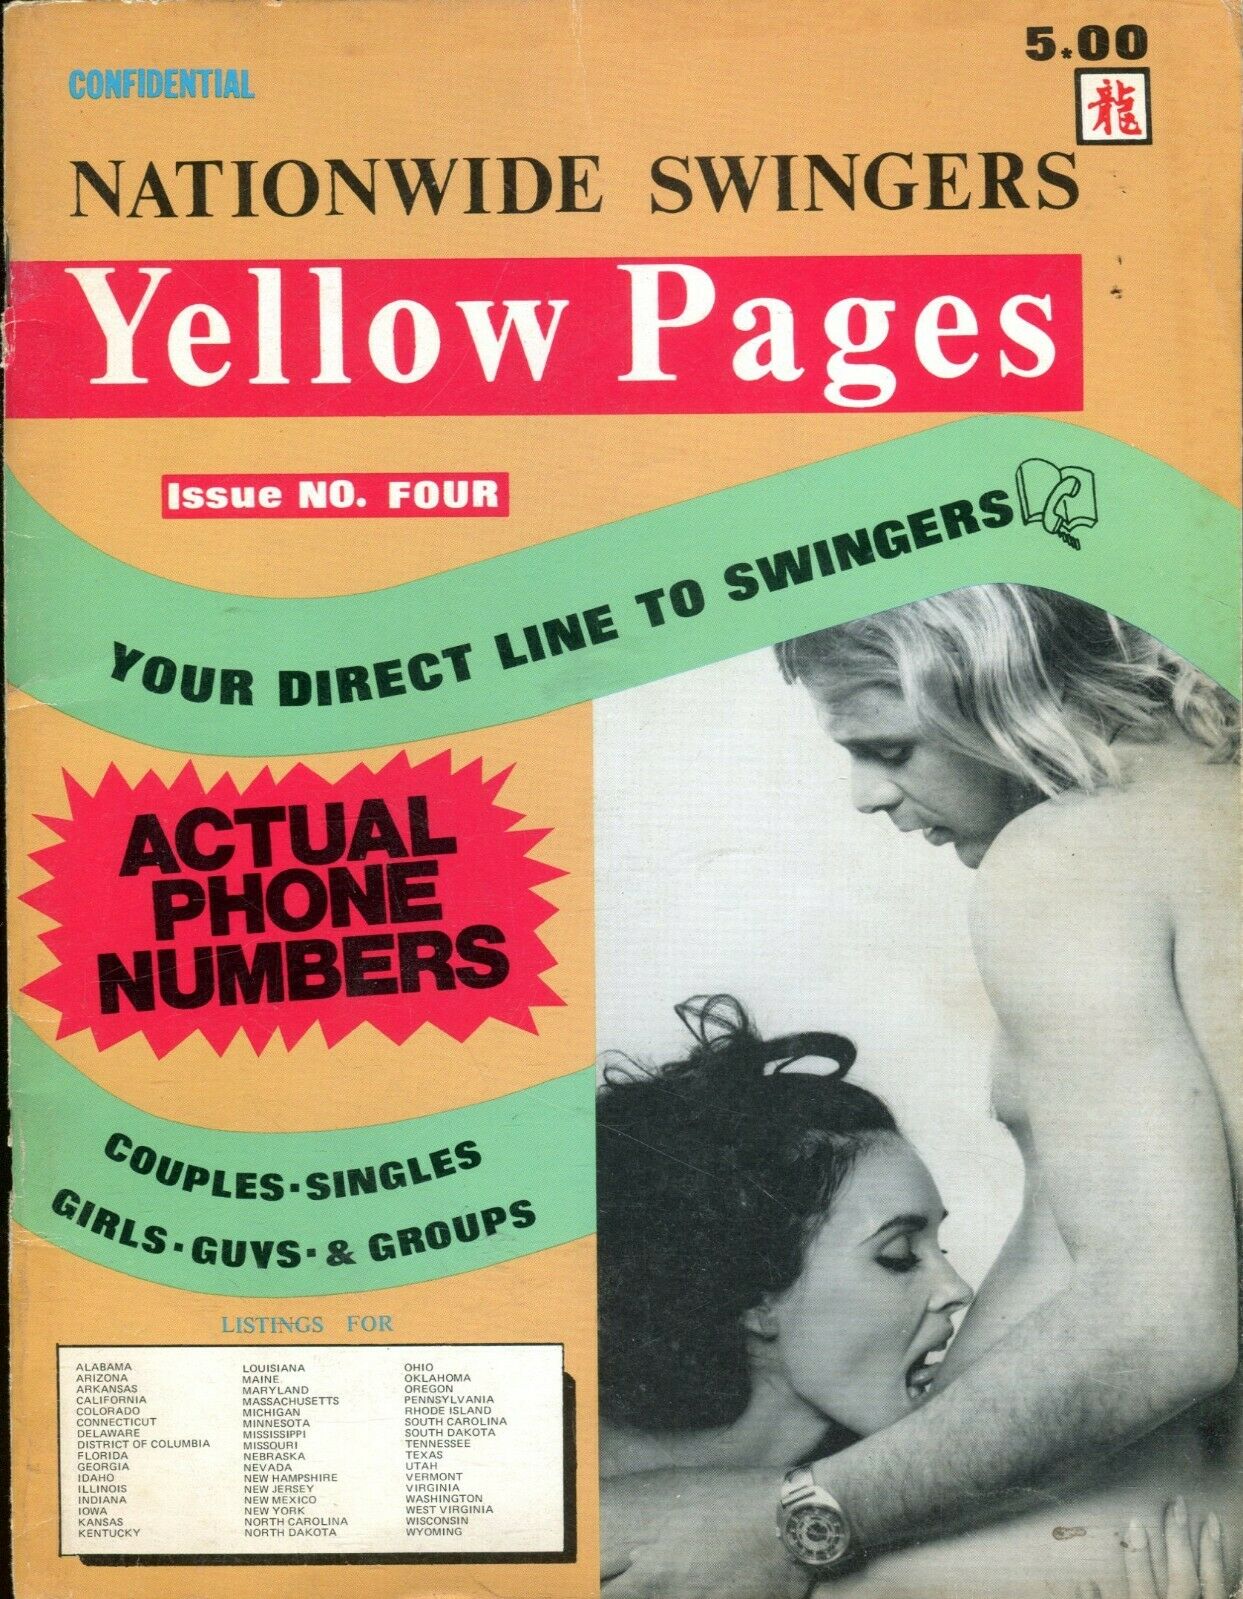 Nationwide Swingers Yellow Pages #4 1970s 071419lm-ep photo